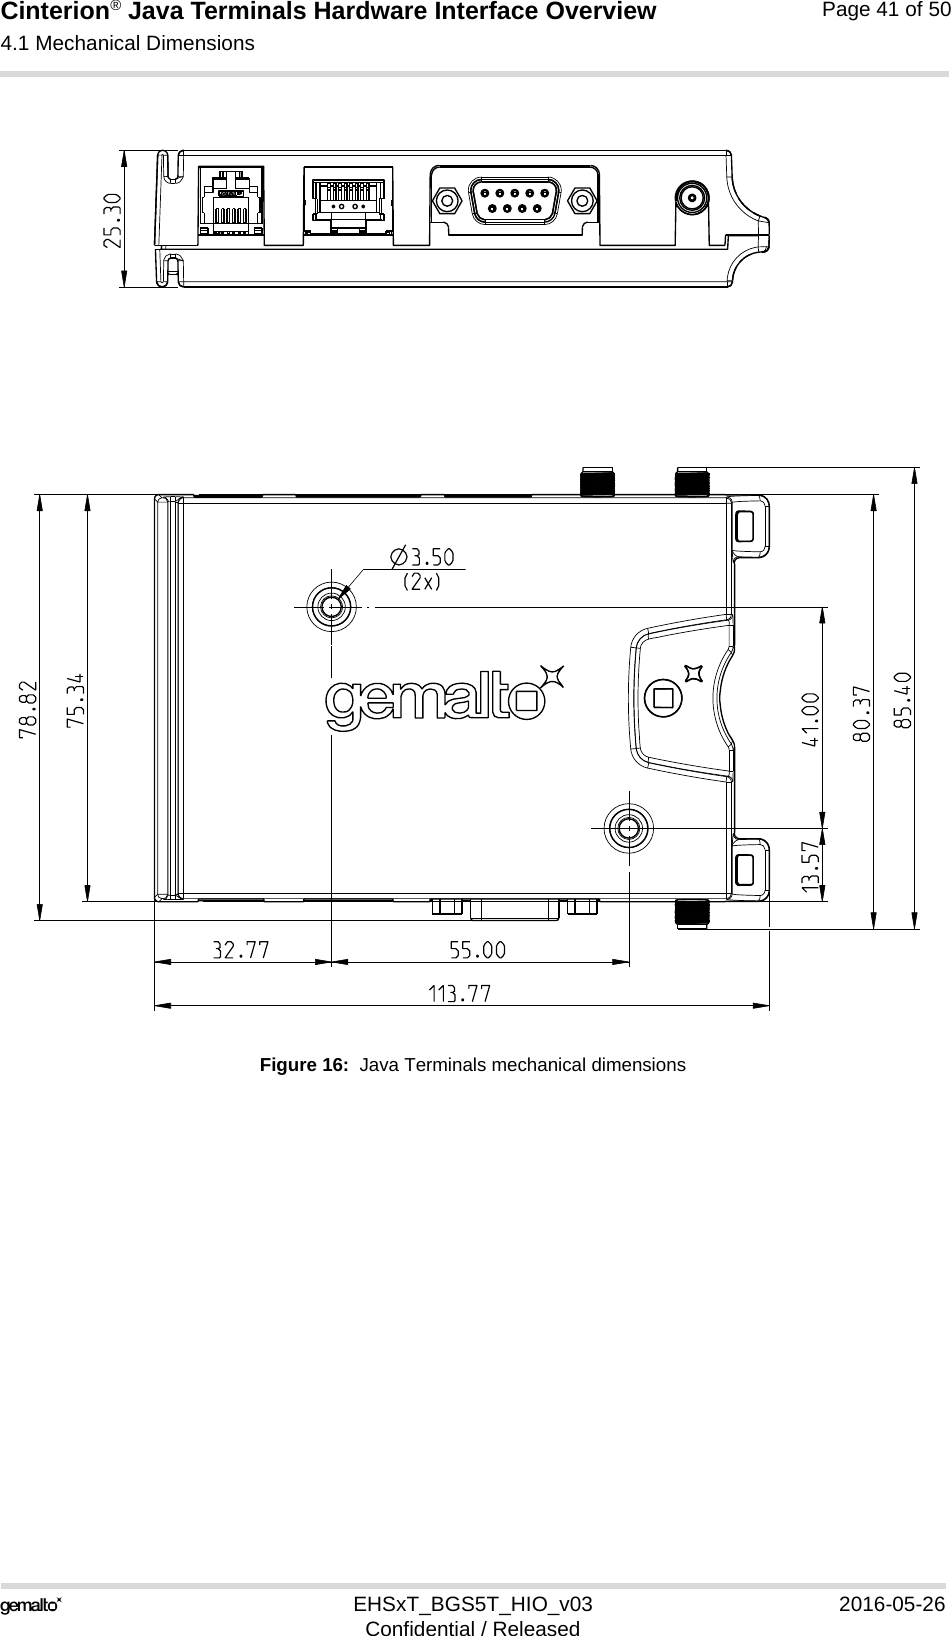 Cinterion® Java Terminals Hardware Interface Overview4.1 Mechanical Dimensions44EHSxT_BGS5T_HIO_v03 2016-05-26Confidential / ReleasedPage 41 of 50Figure 16:  Java Terminals mechanical dimensions